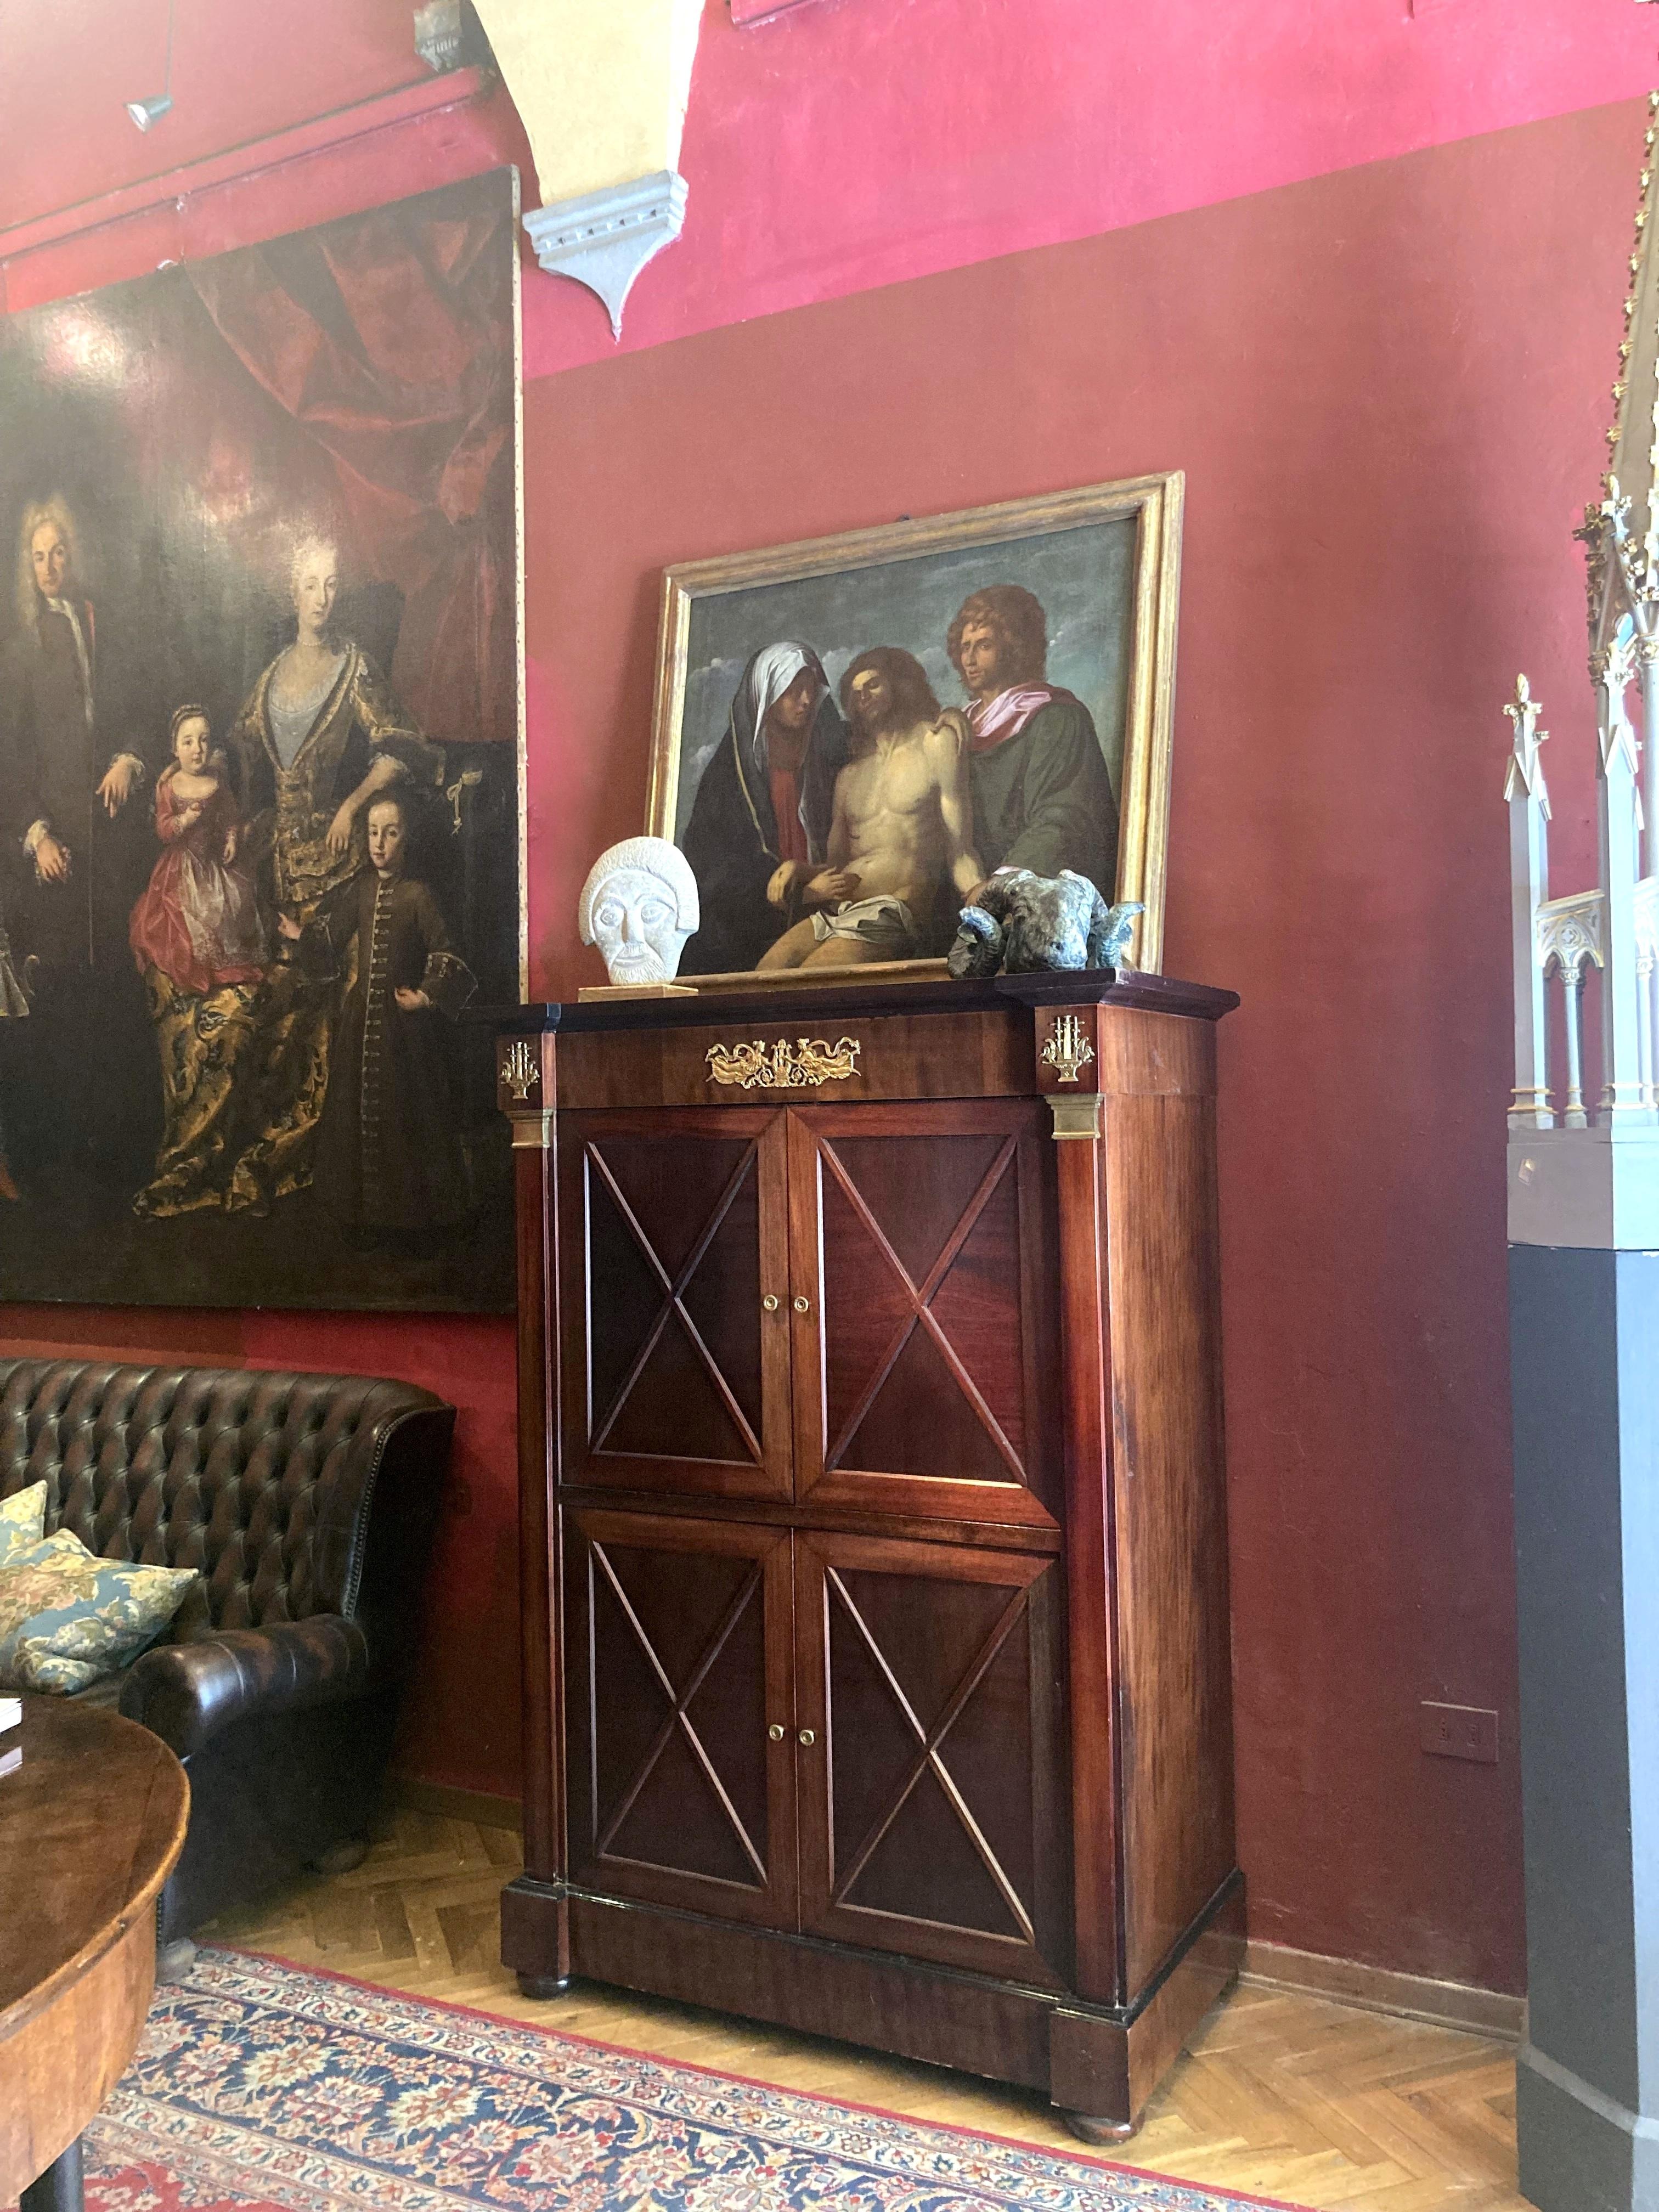 These imposing solid mahogany cabinets with gilt bronze mounts in the style of the Louis XVI French Empire furnished the luxurious Intercontinental Paris Le Grand Hotel. It has recently been renovate, the Second Empire style has been maintained but